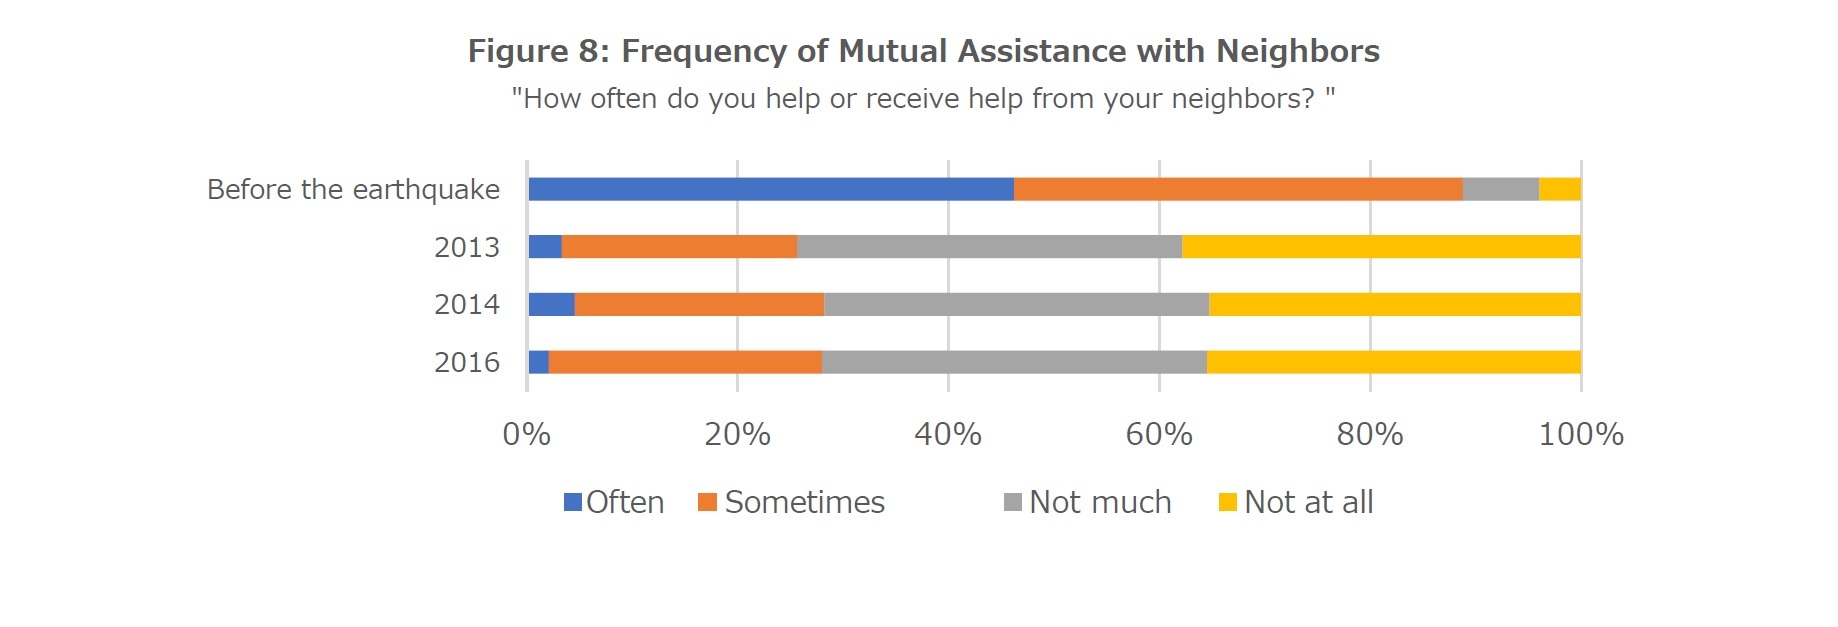 Figure 8: Frequency of Mutual Assistance with Neighbors